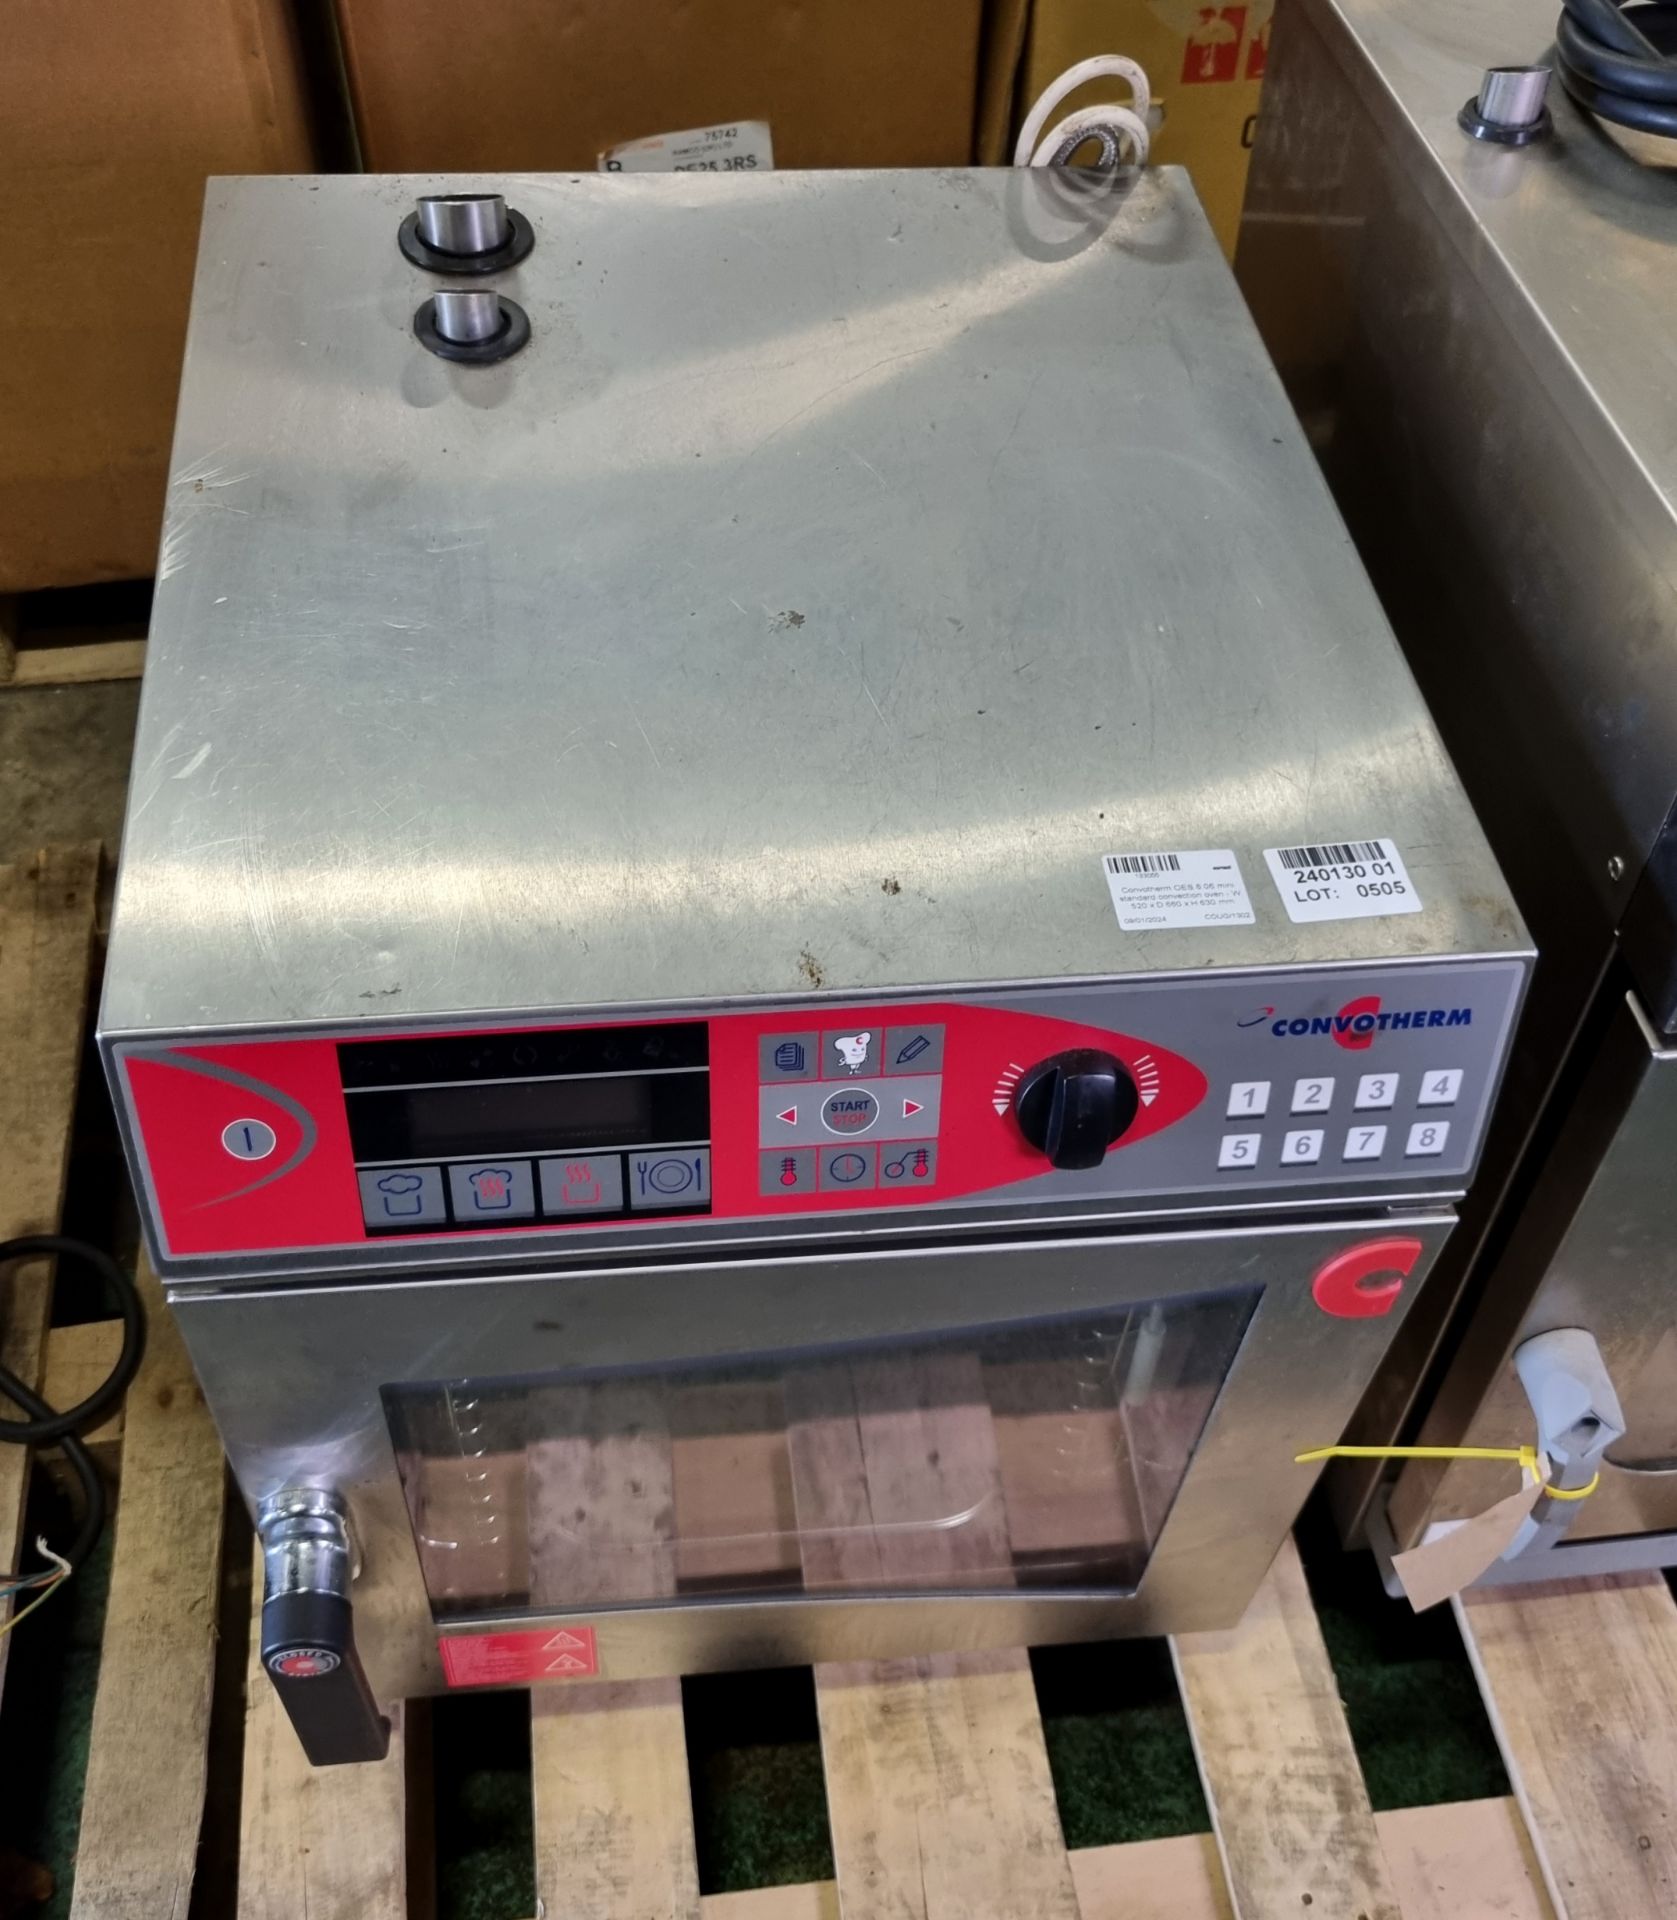 Convotherm OES.6.06 mini standard convection oven - W 520 x D 660 x H 630 mm - Image 2 of 4